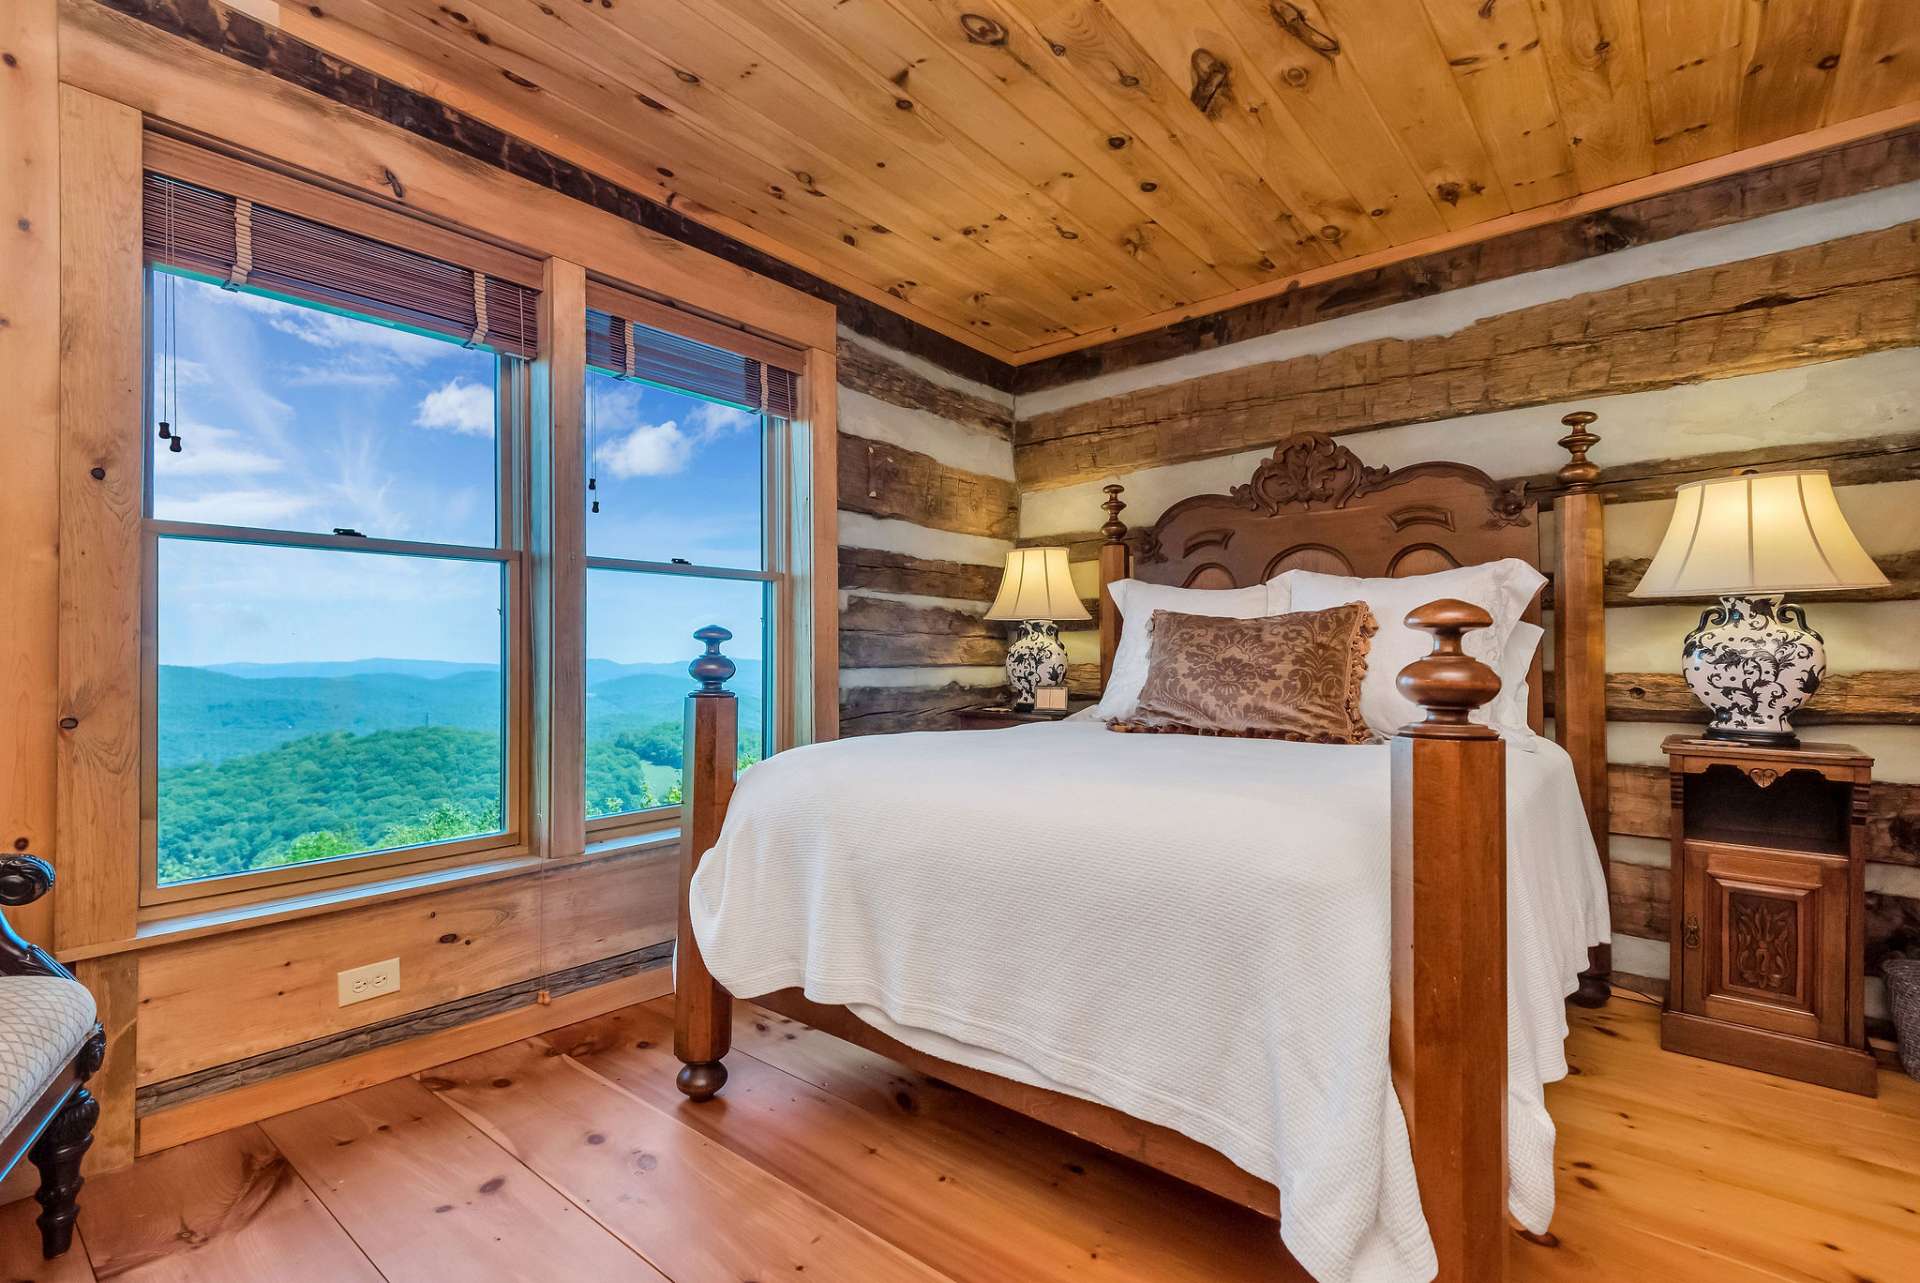 Guest bedroom on upper level includes the same incredible long range view.